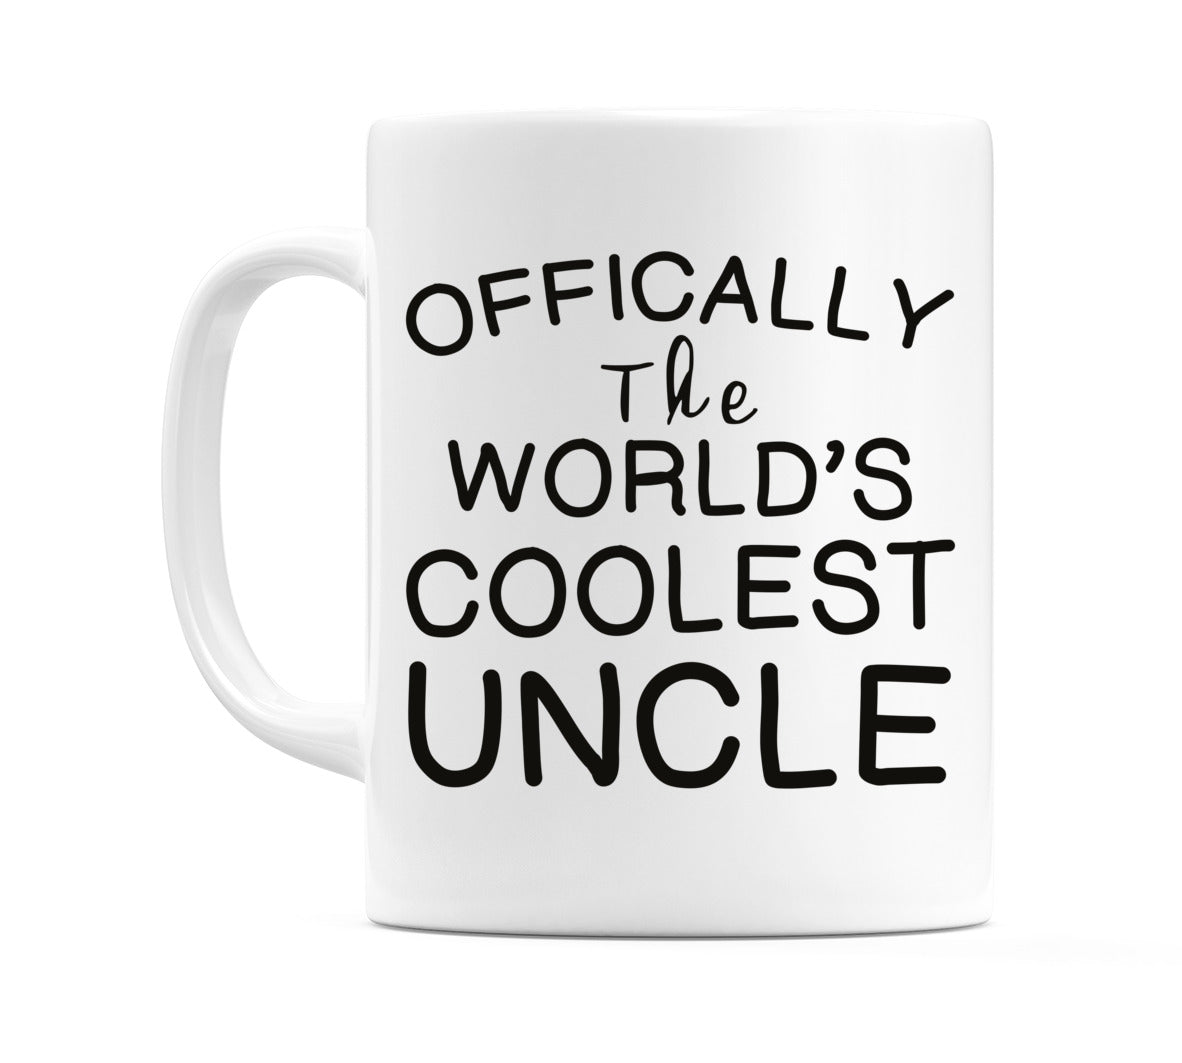 Officially the World's Coolest Uncle Mug